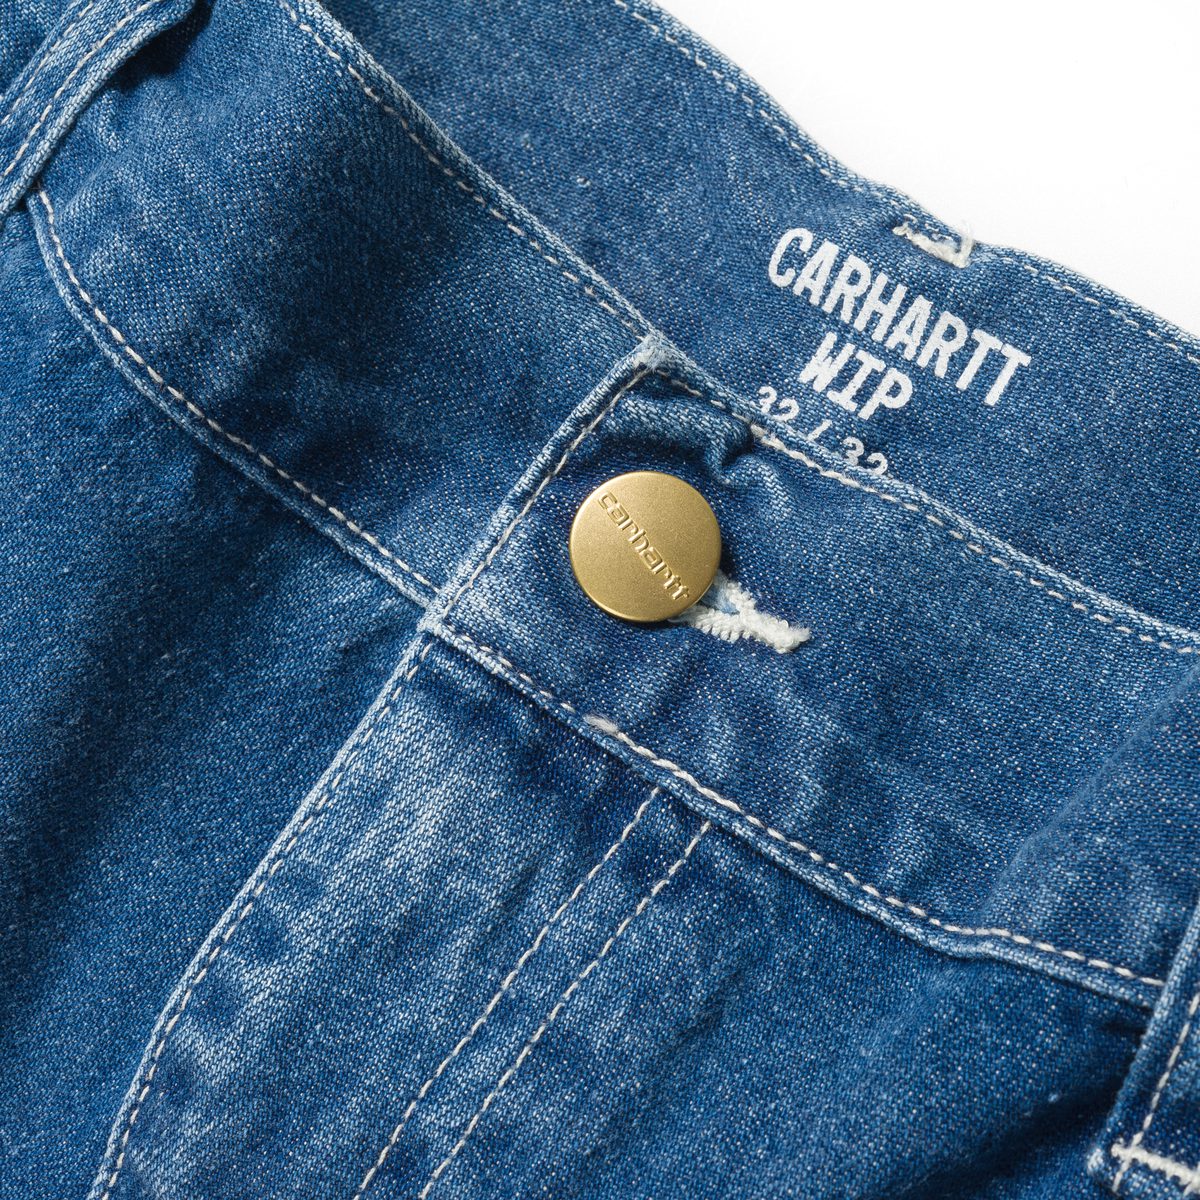 CARHARTT WIP SIMPLE PANT - Blue, stone washed